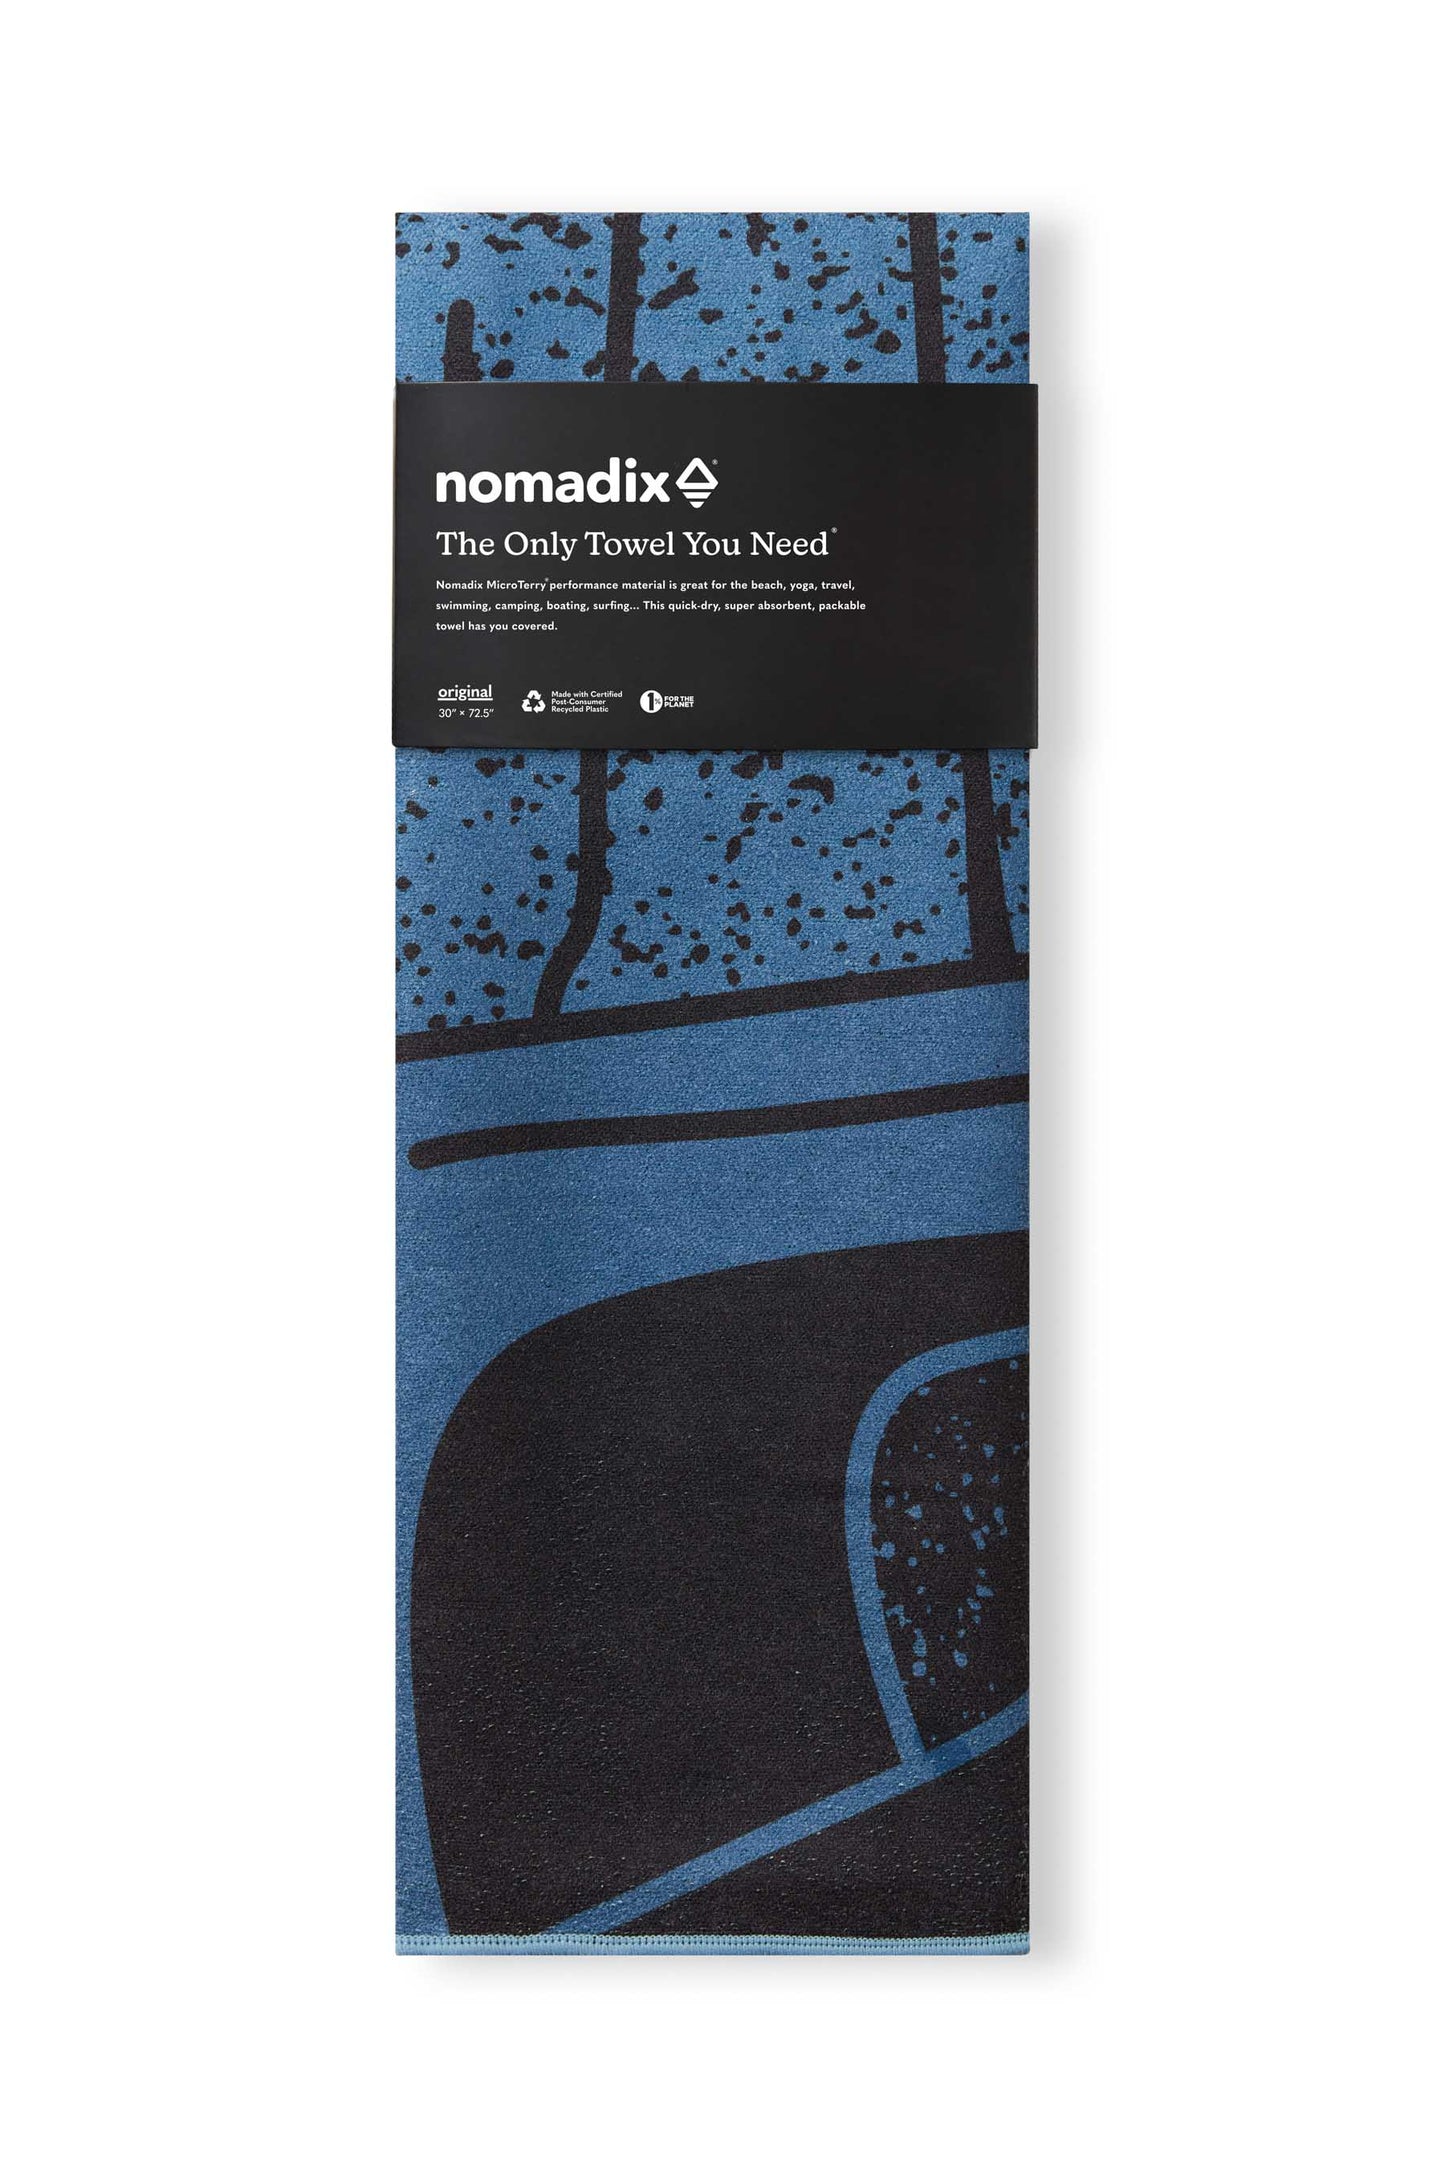 NOMADIX SEQUOIA NATIONAL PARK VALLEY NIGHT TOWEL NEW!